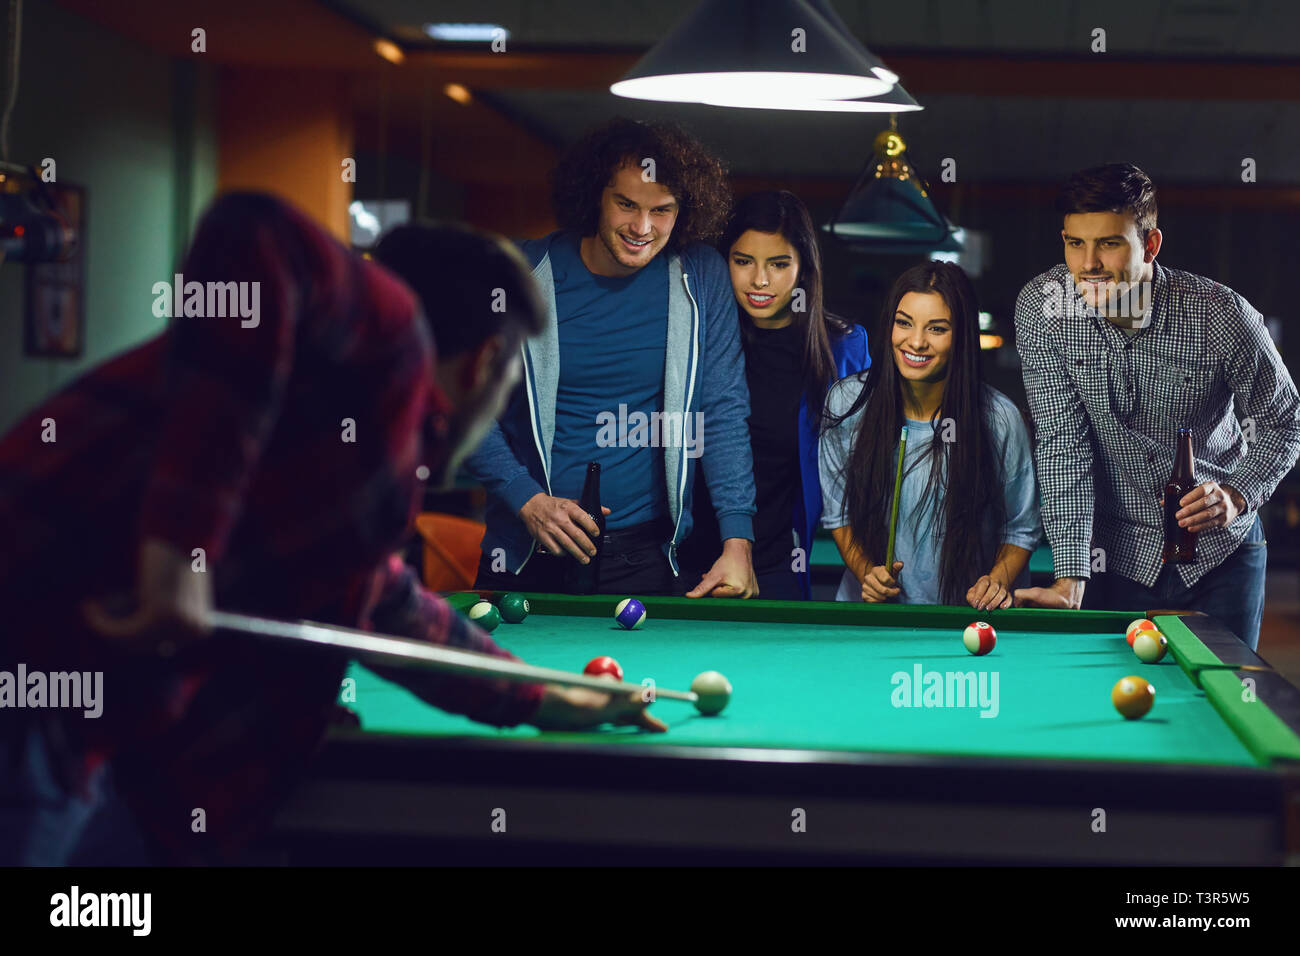 Billiards game. young friends playing pool together Stock Photo - Alamy